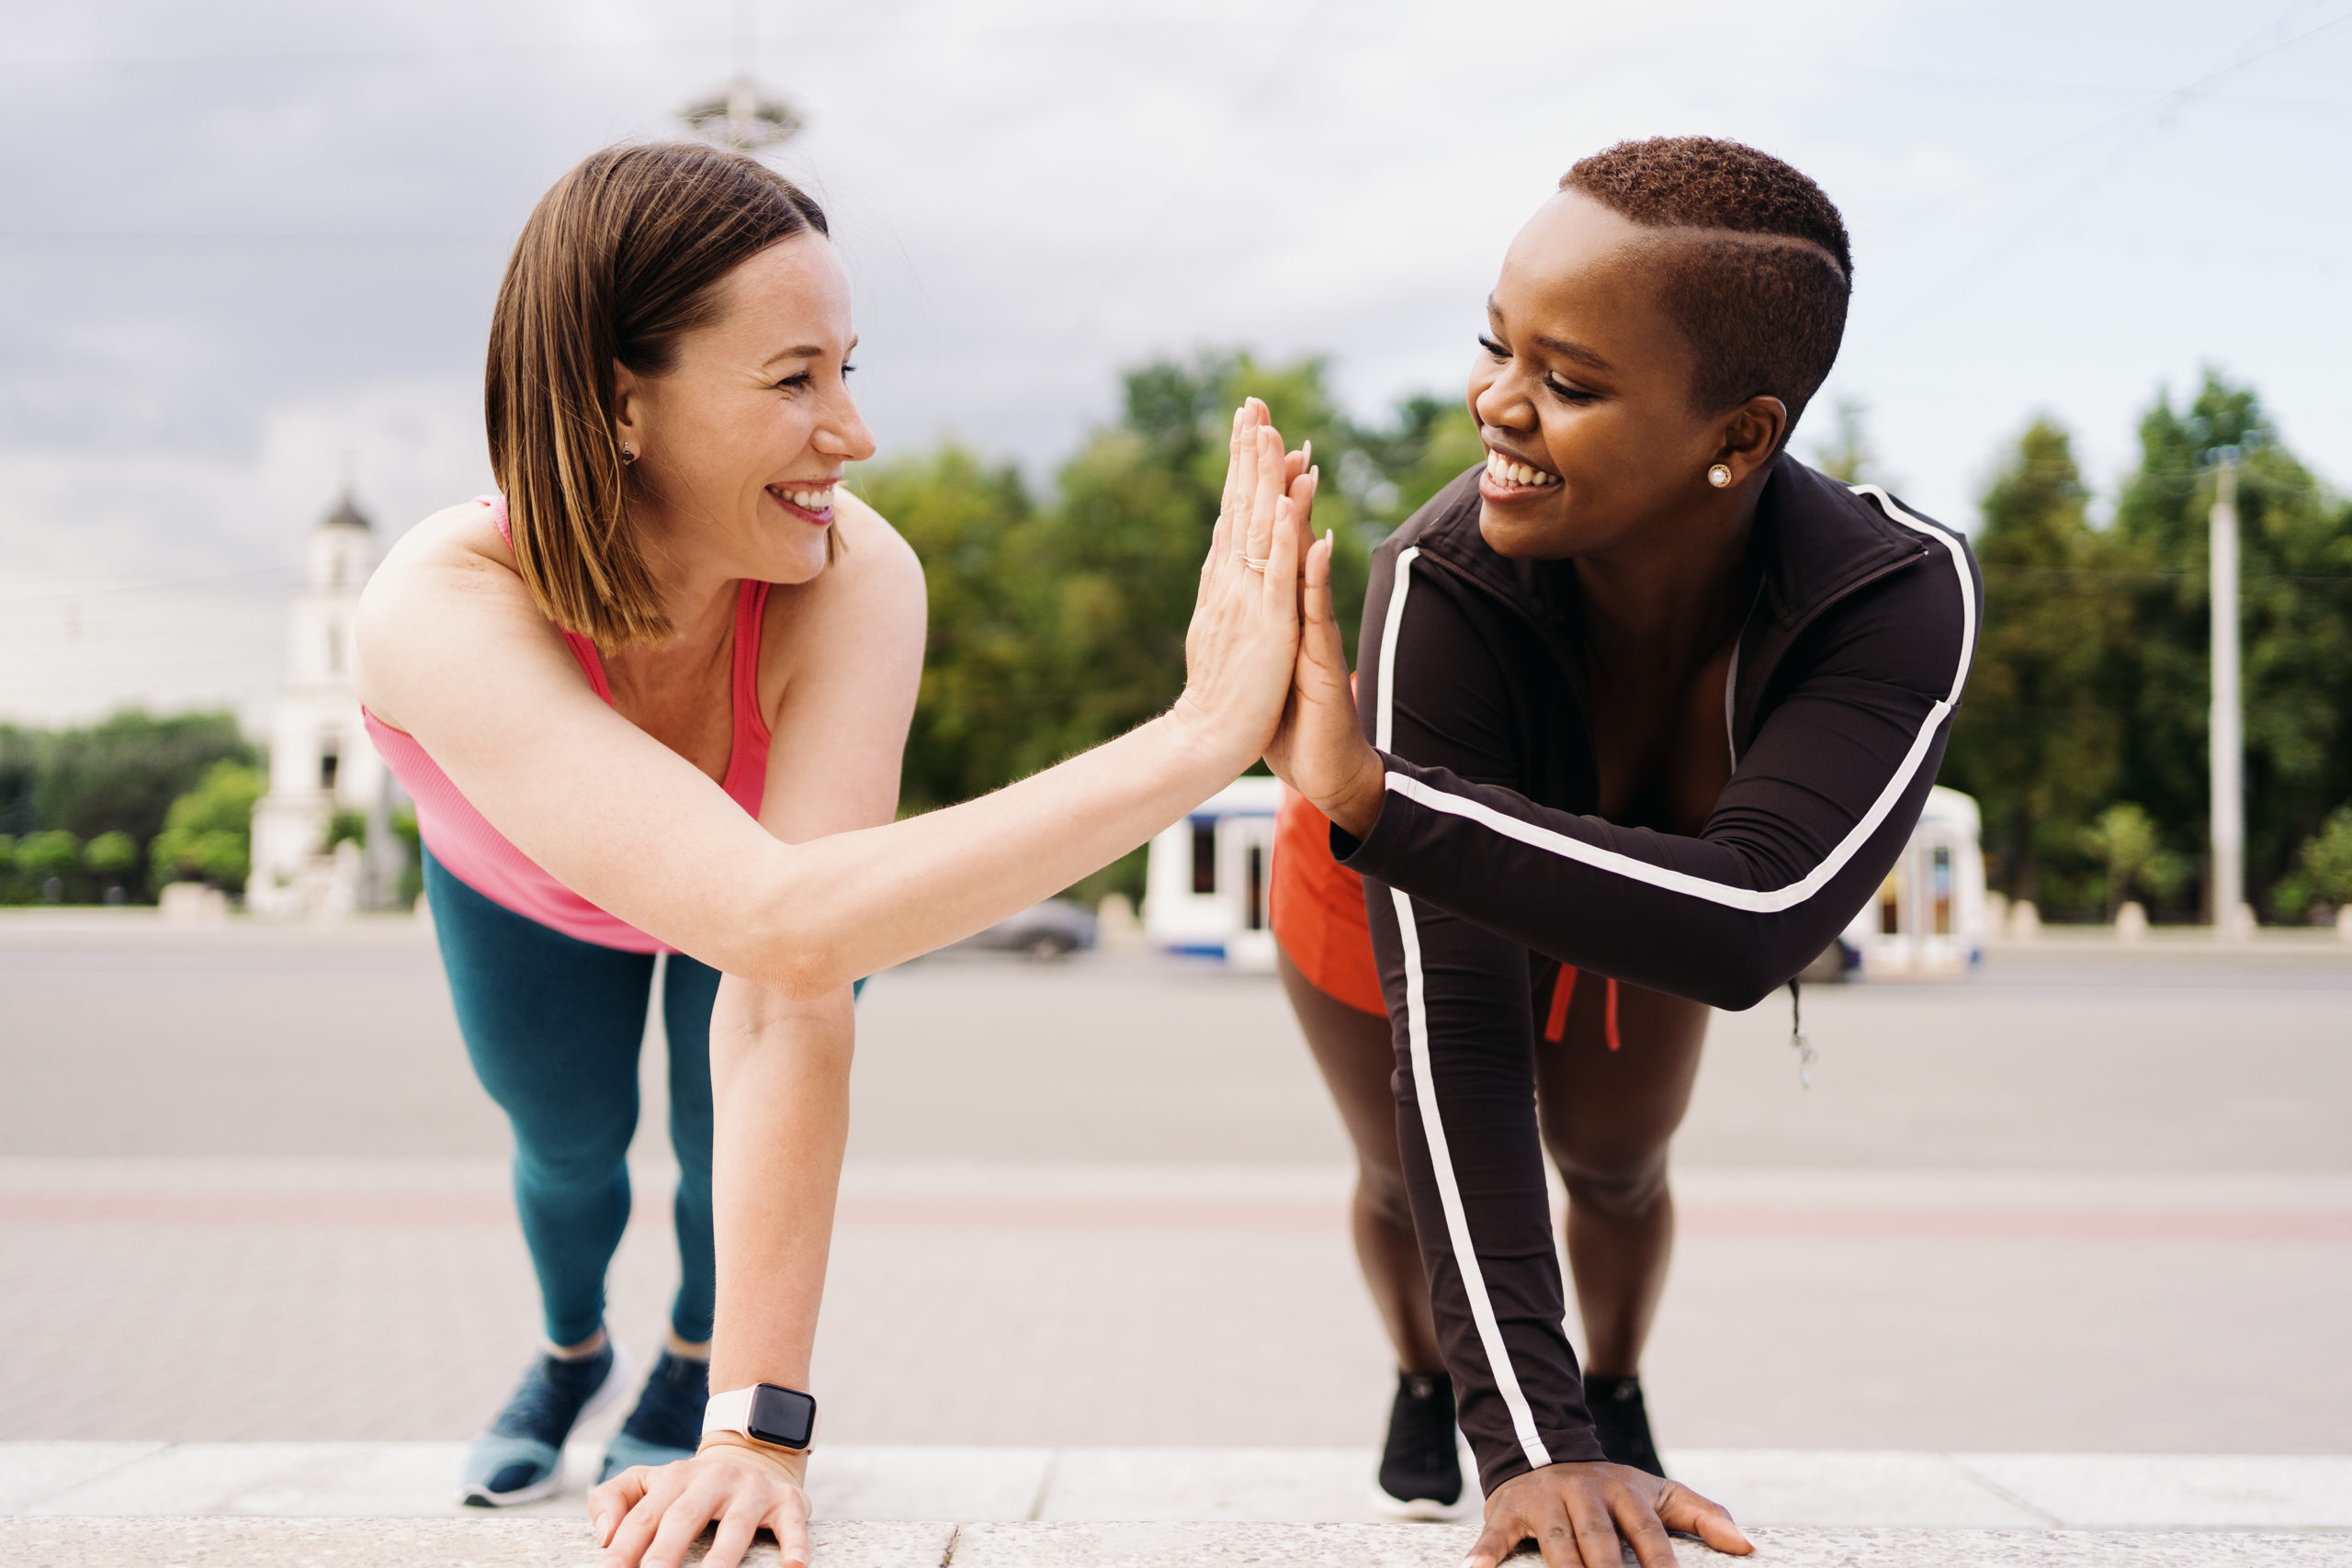 Two smiling diverse young woman in Athletic Workout Clothes are Doing a Plank Exercise working out together in city square.